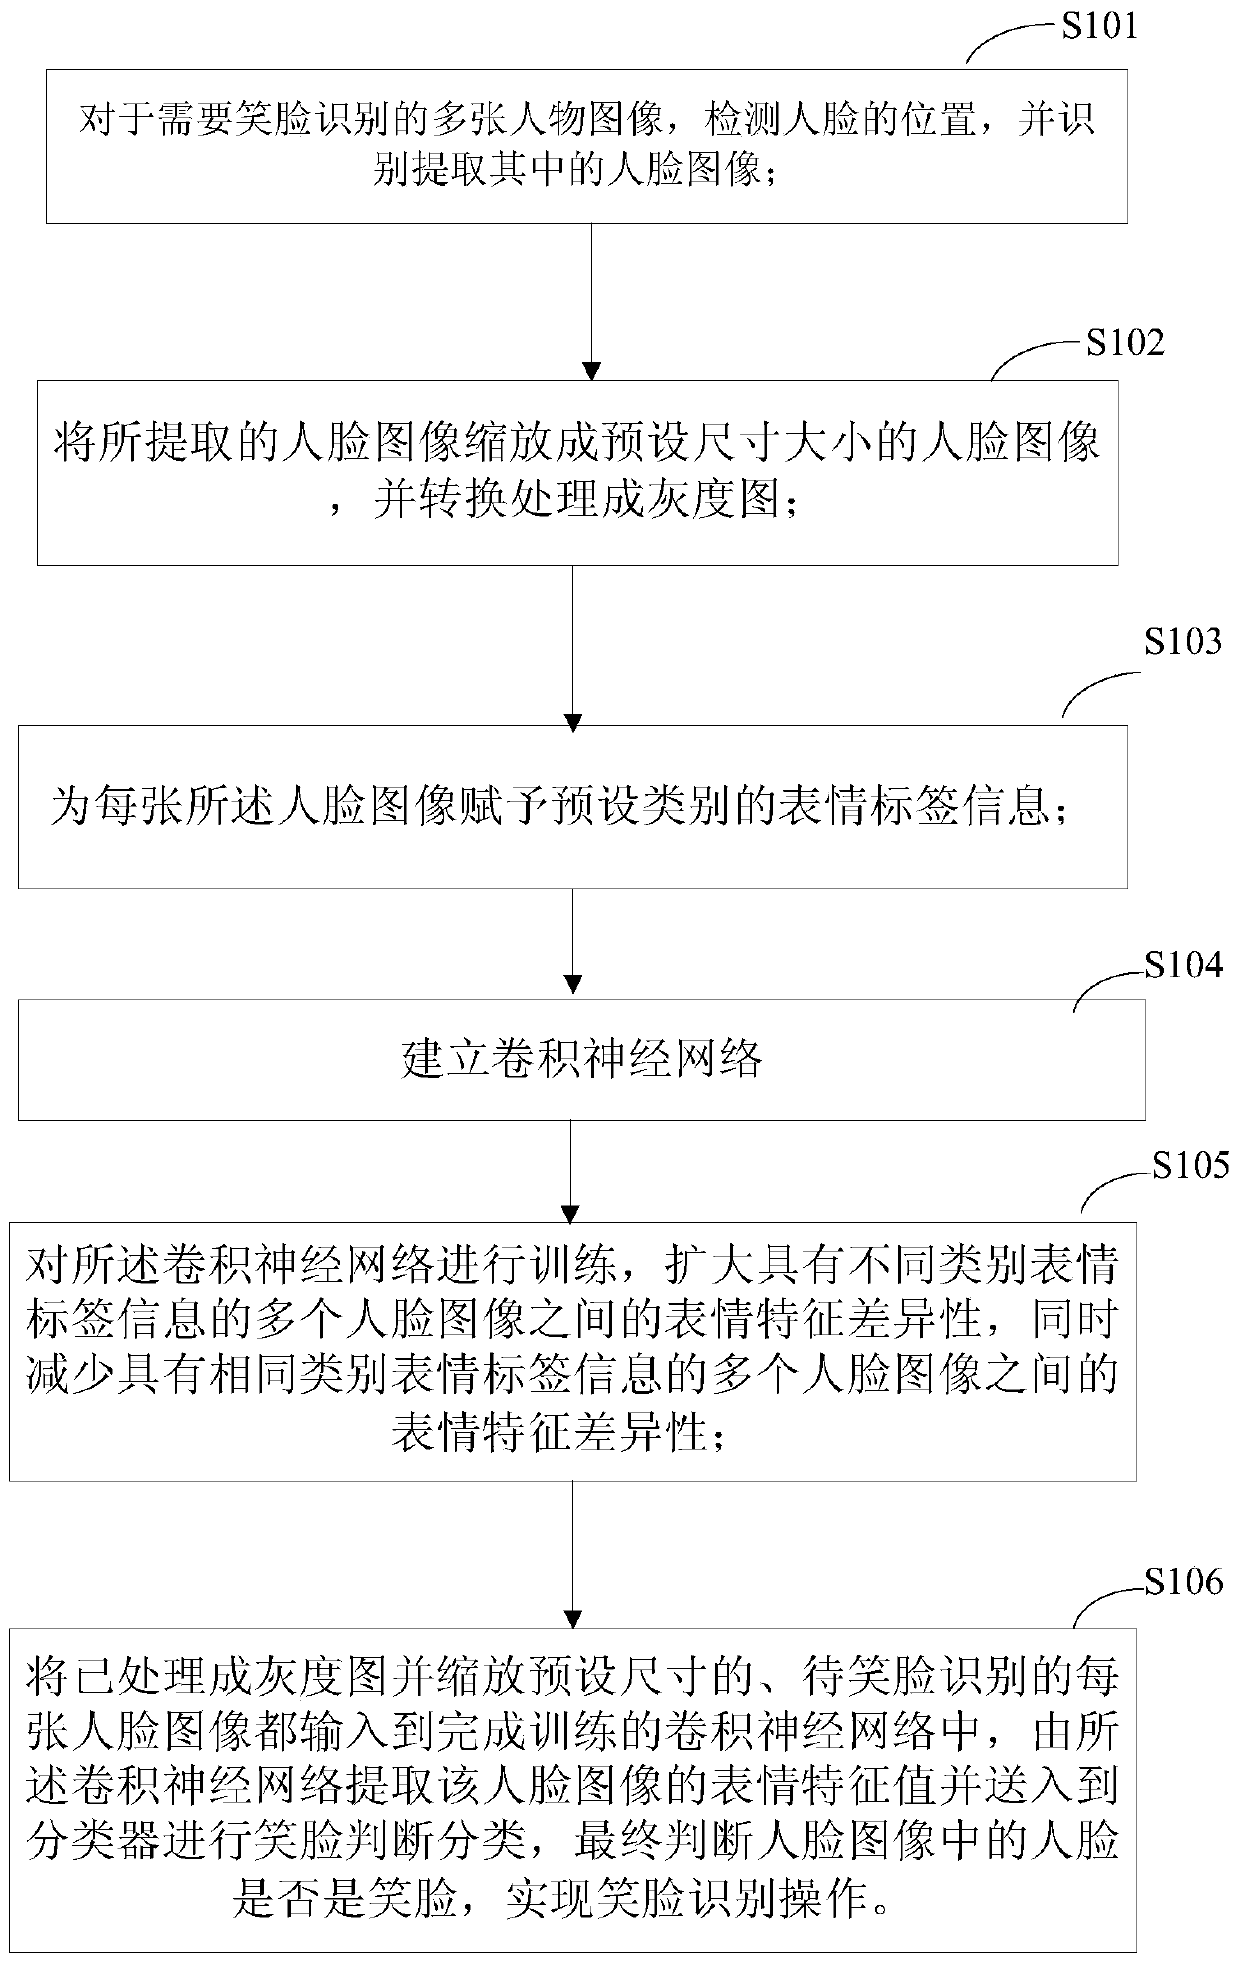 Smile recognition method and device for a human face image